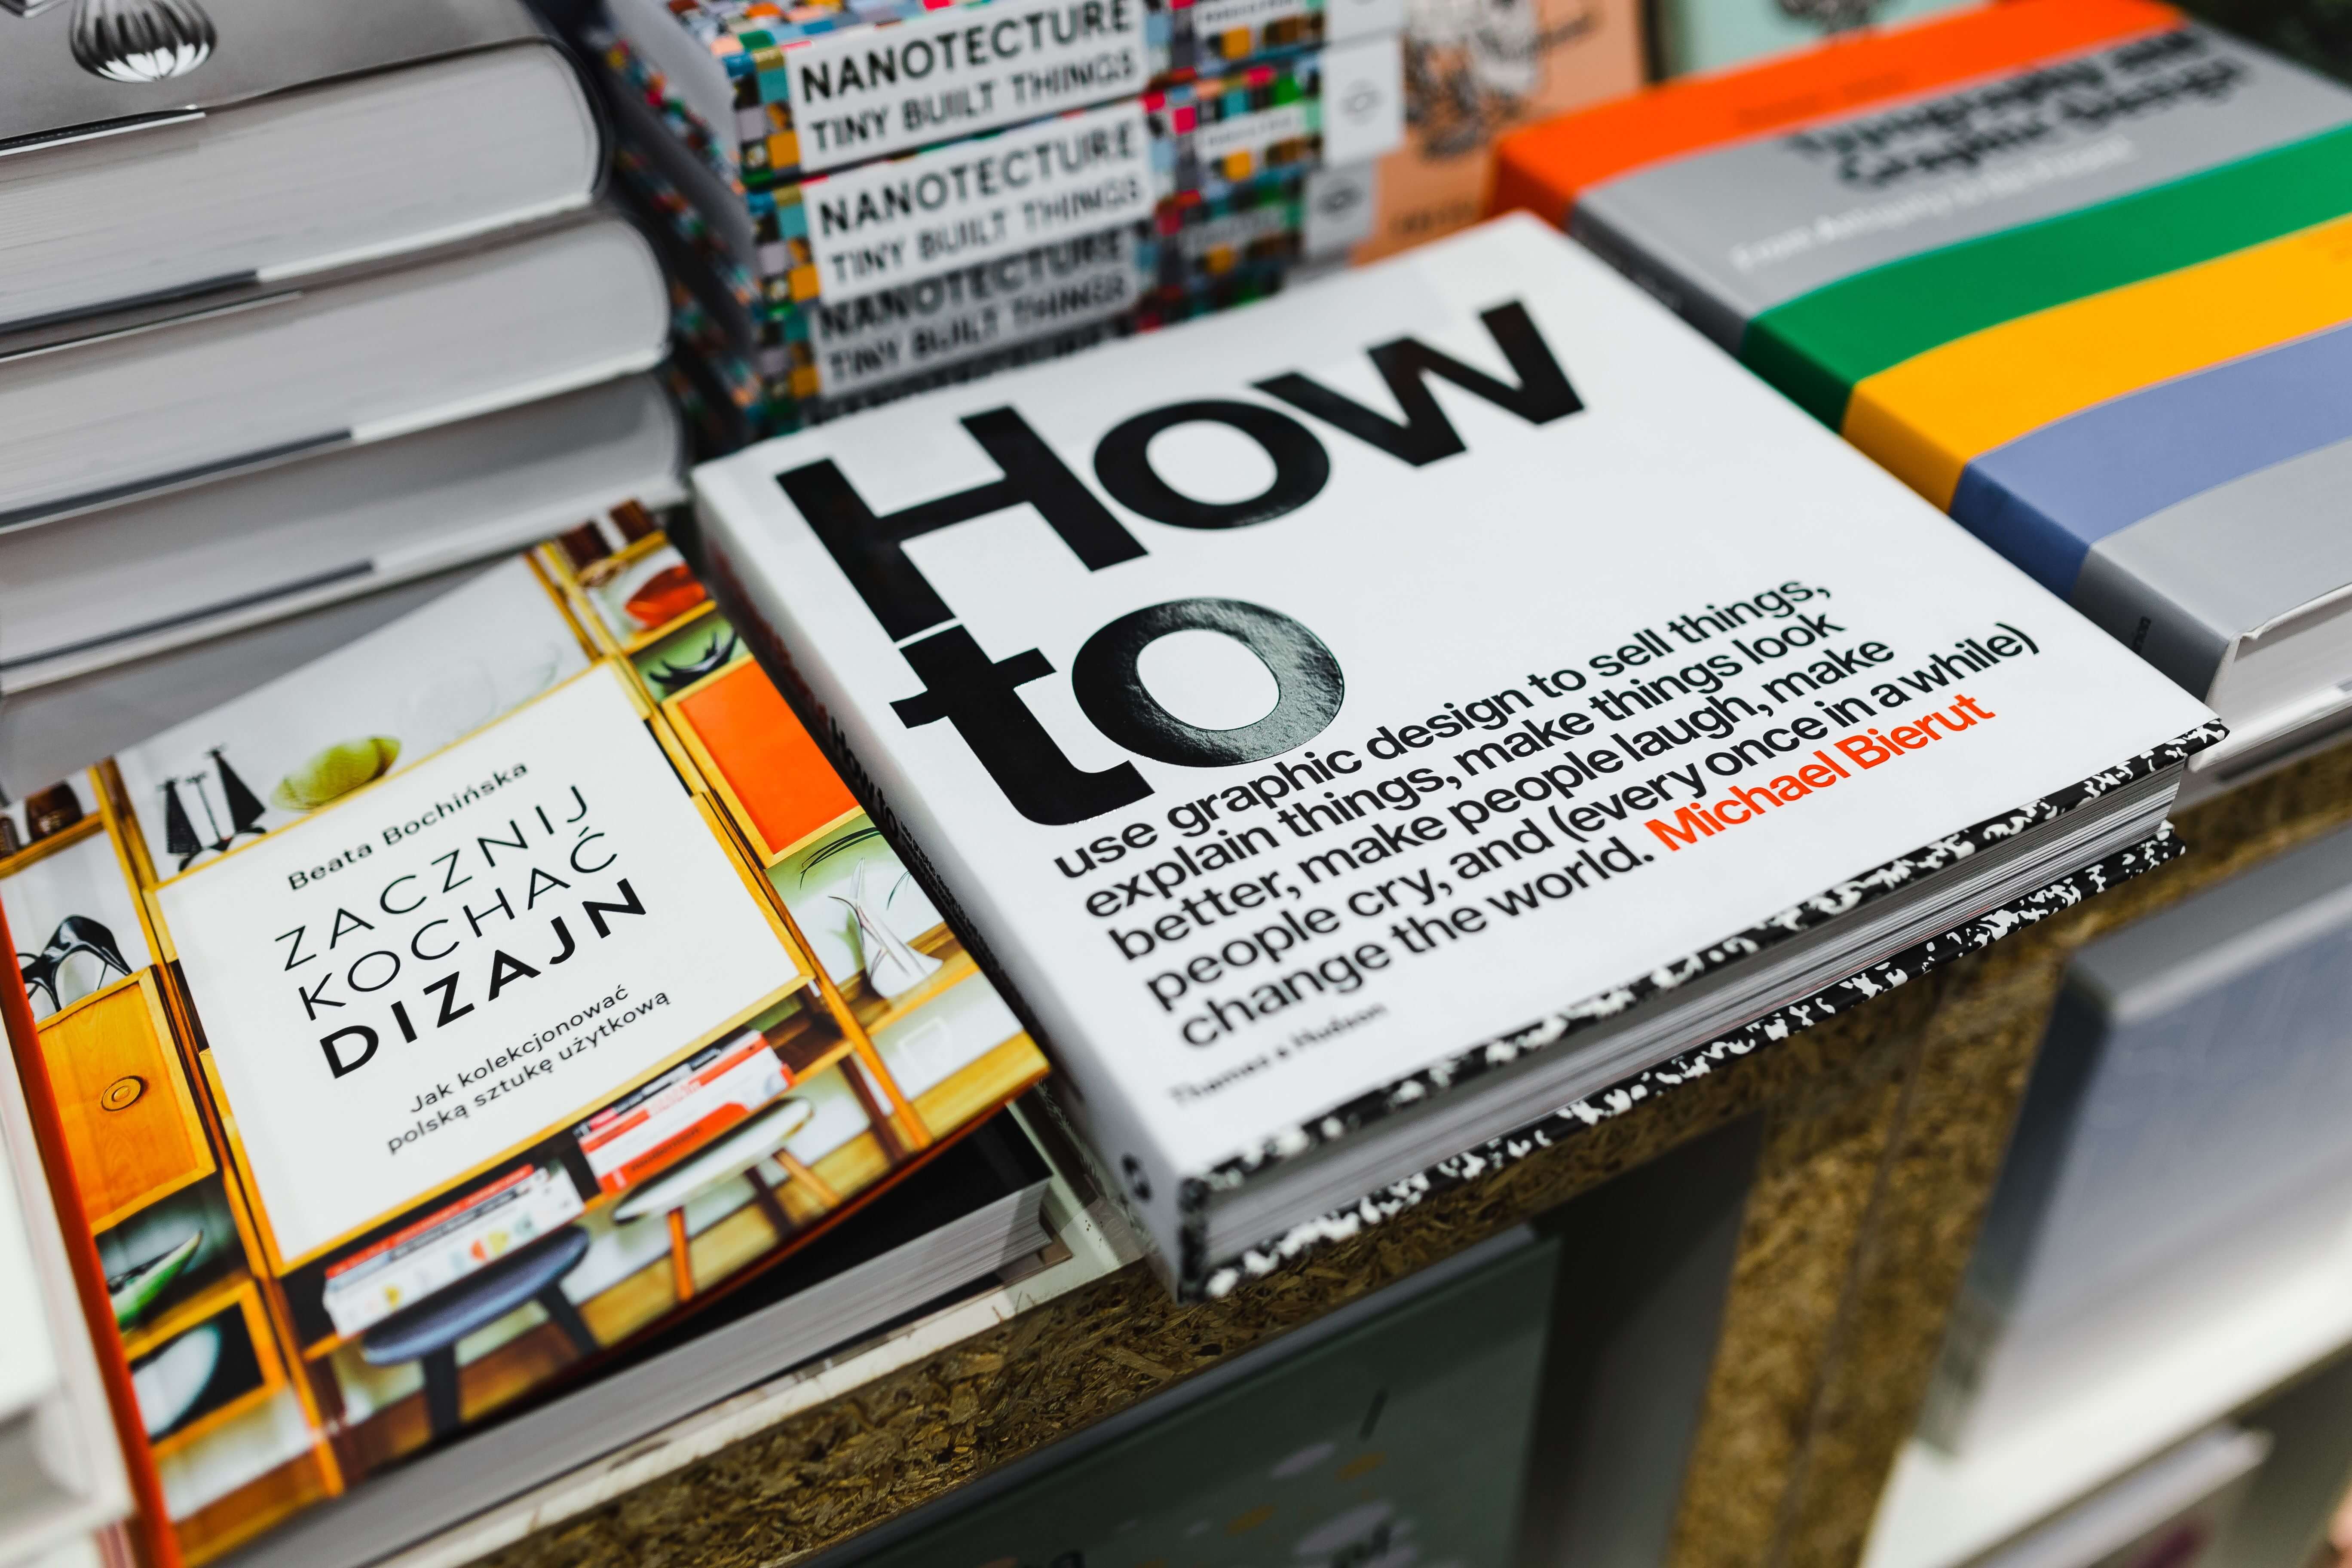 5 great books for entrepreneurs, startups and marketers